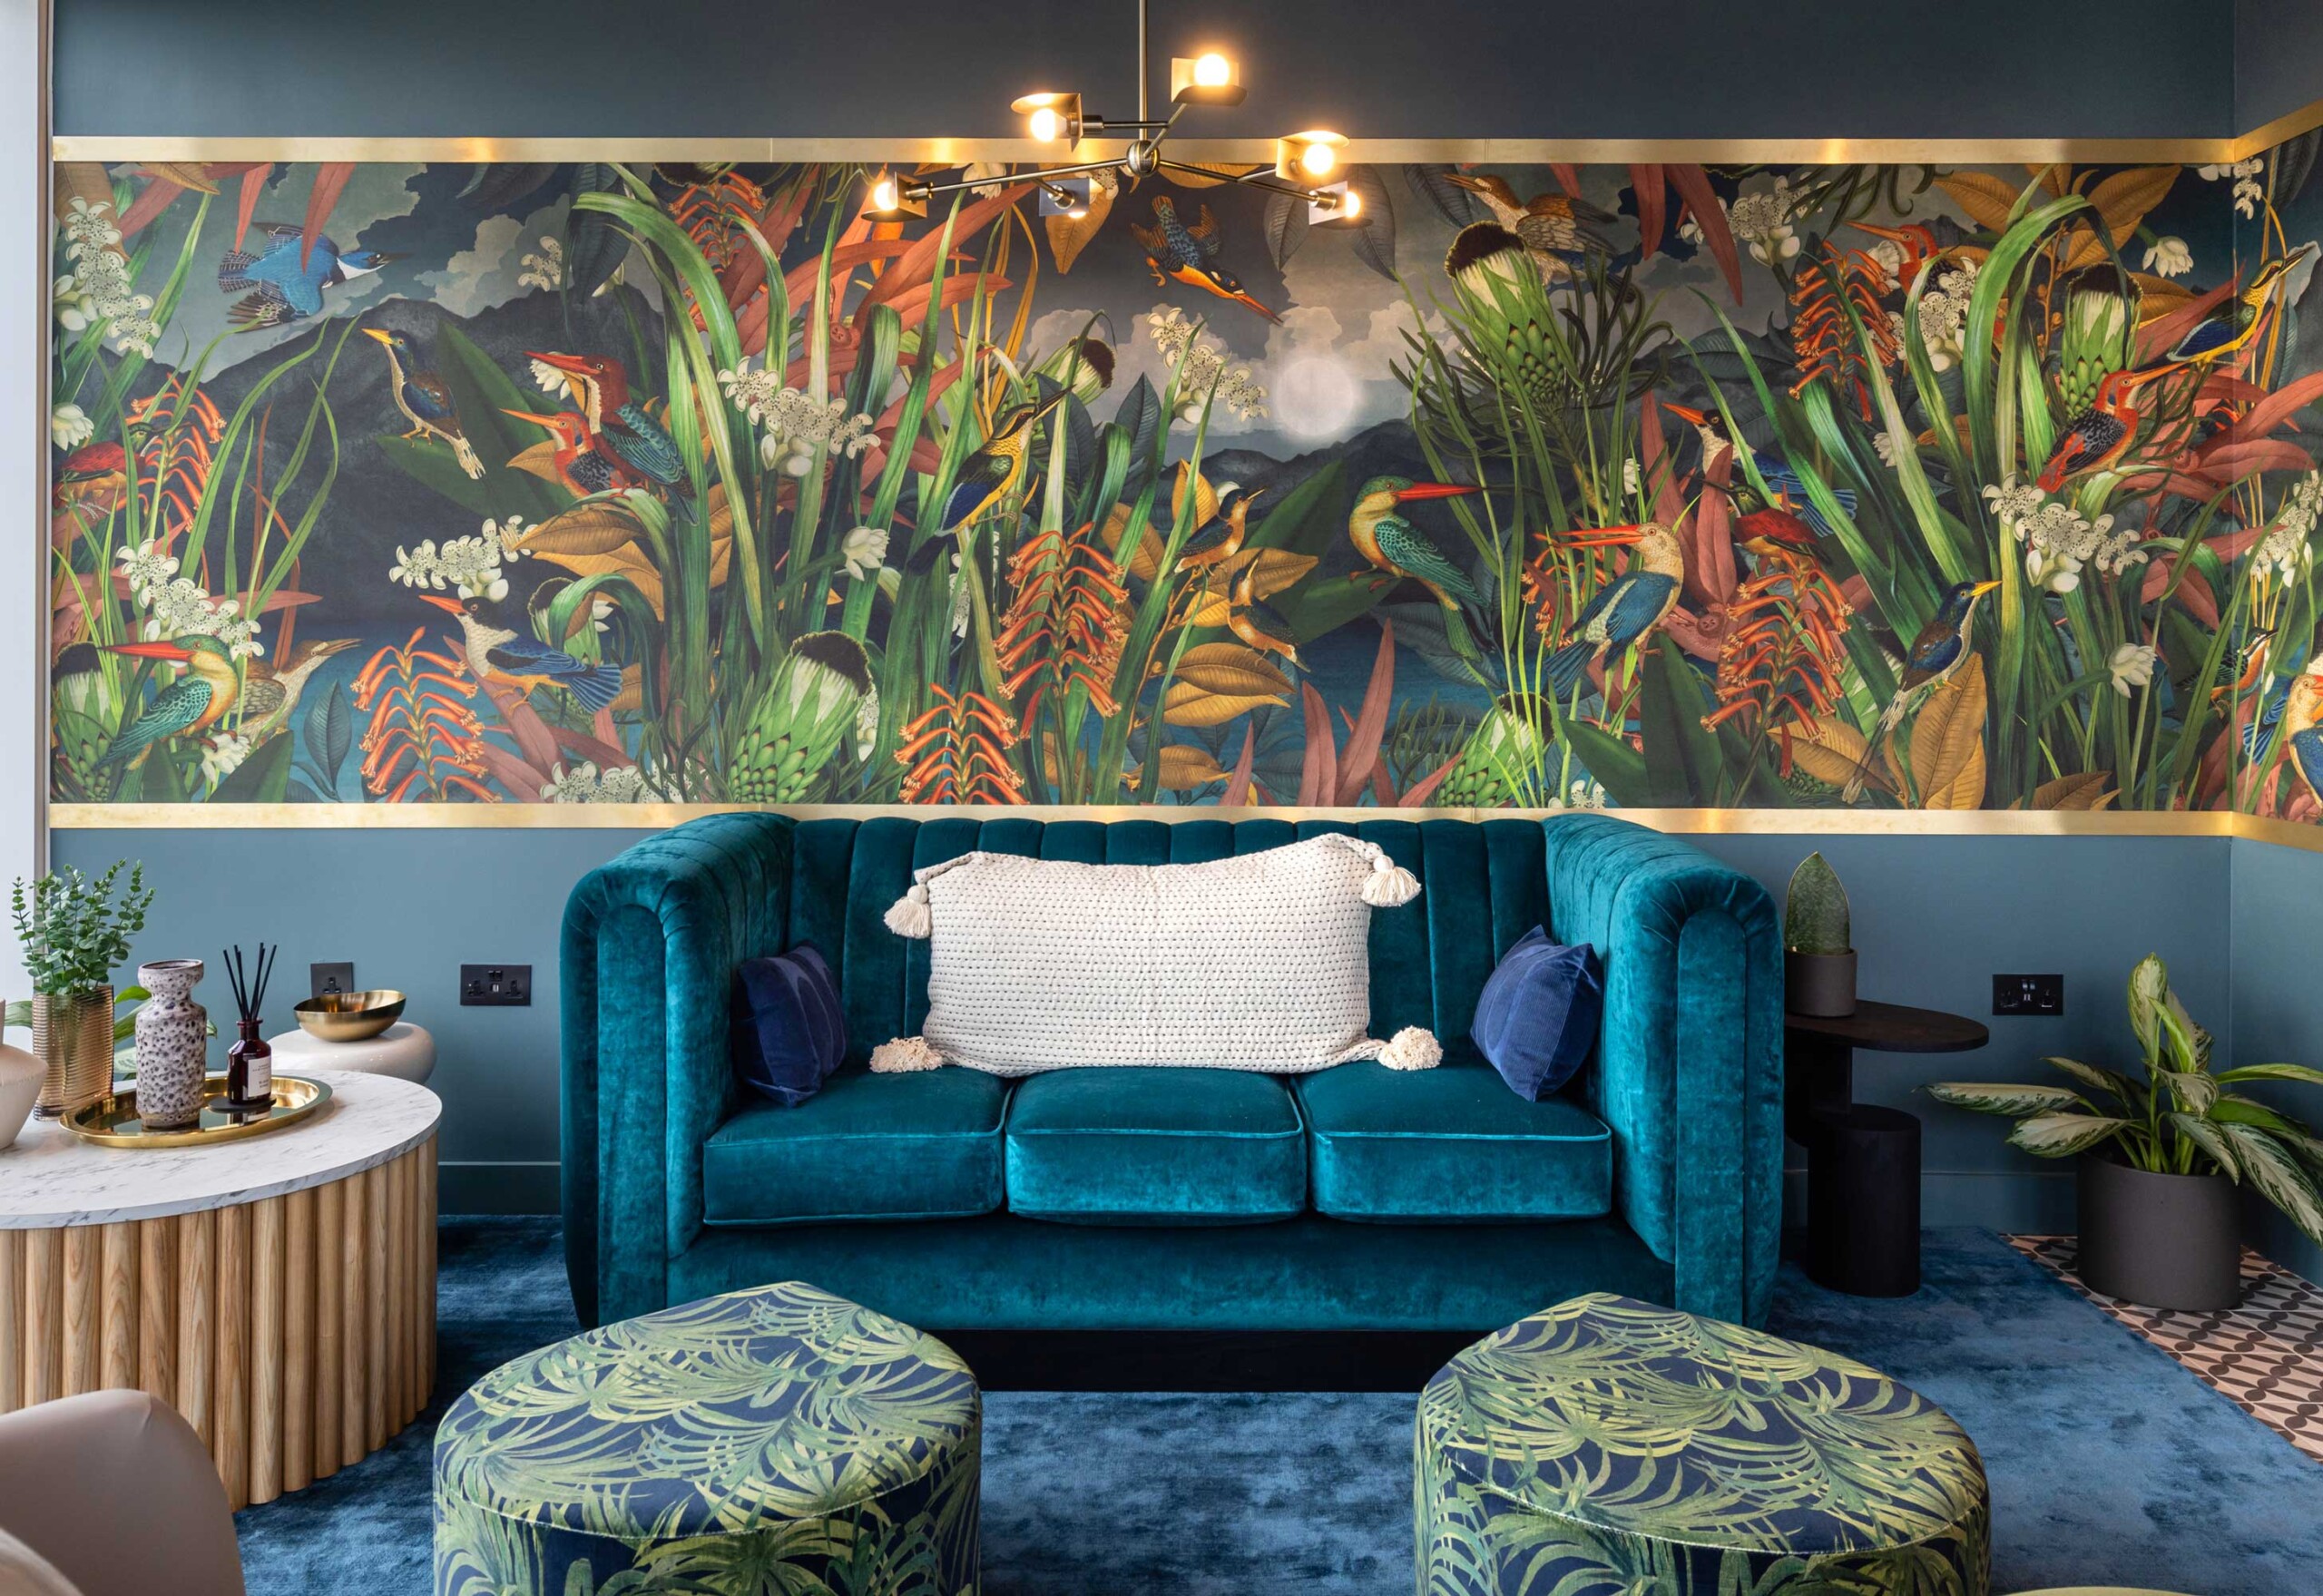 Halcyon wallpaper design filled with colourful kingfishers amongst river reeds and botanicals